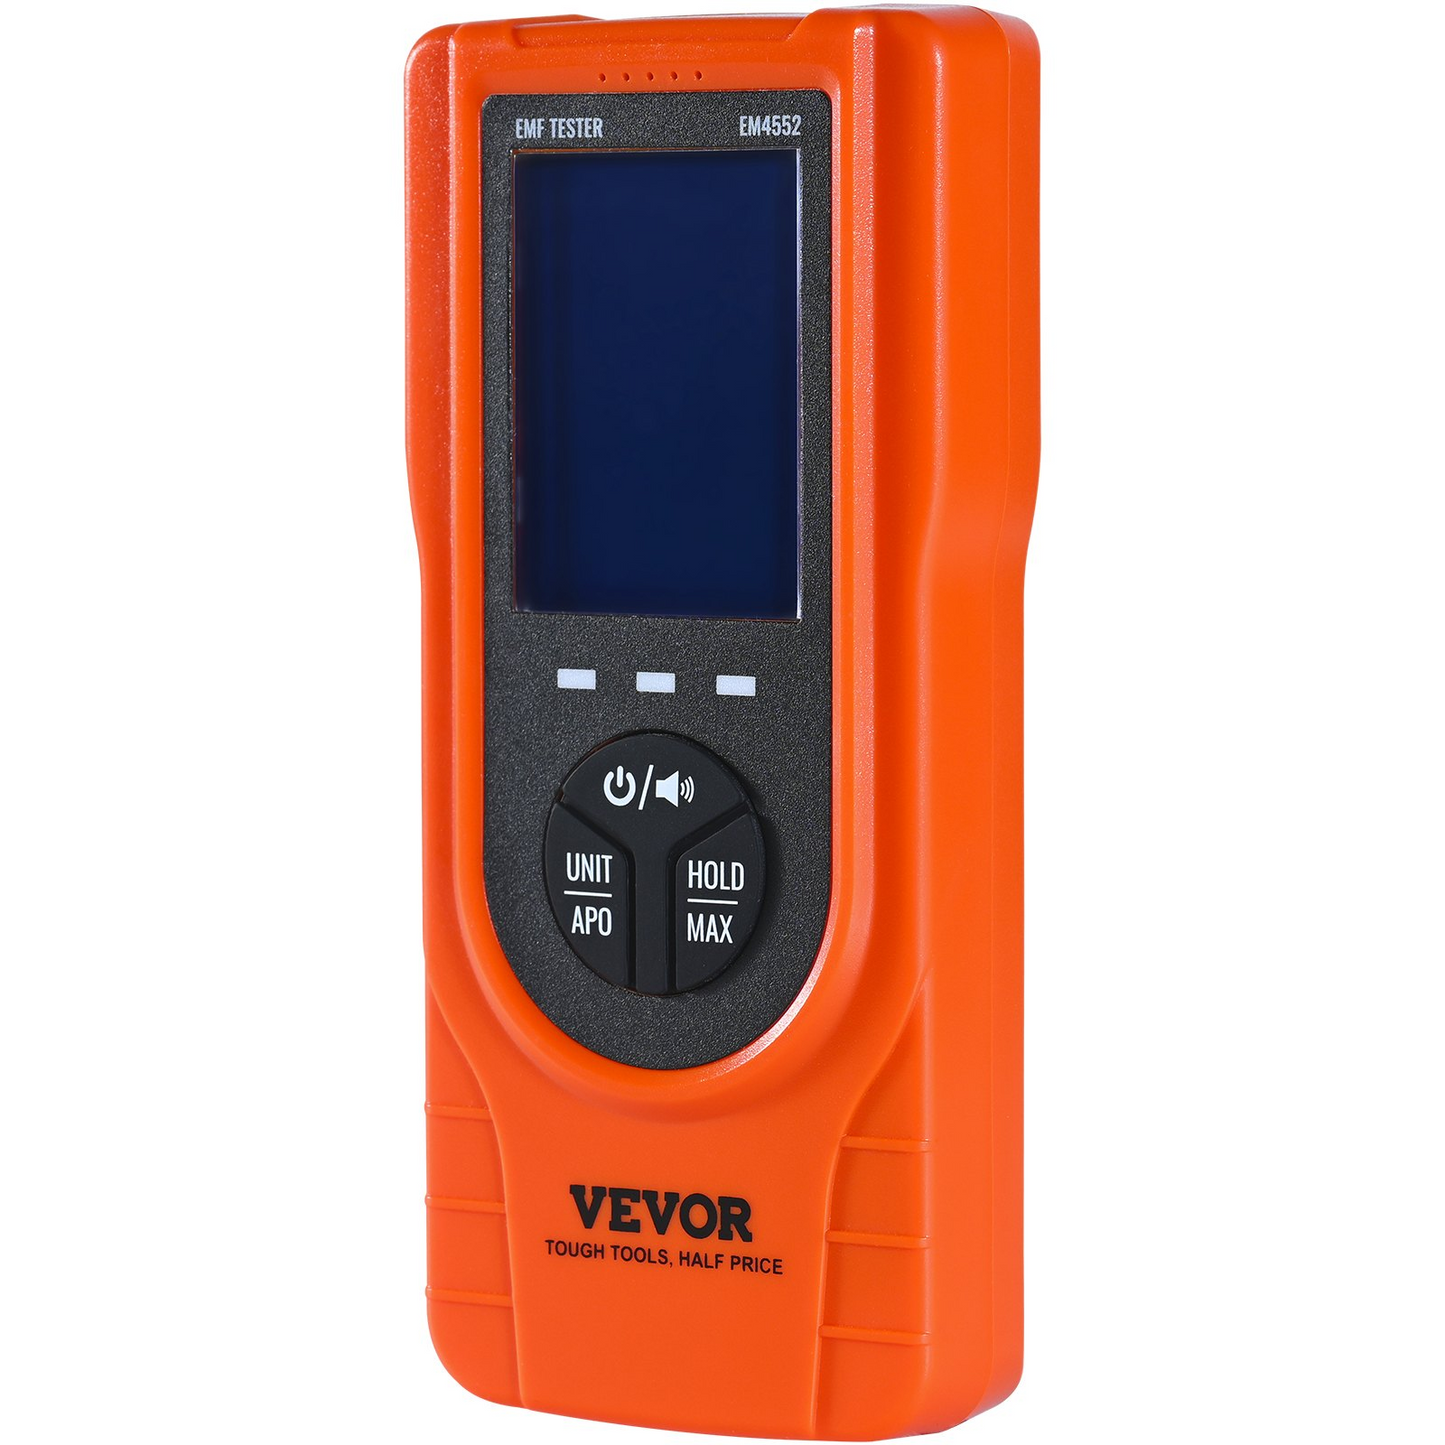 VEVOR 3-in-1 EMF Meter, 5Hz - 3.5GHz, Handheld Rechargeable Electromagnetic Field Radiation Detector, Digital LCD EMF Tester for EF MF RF Home Inspections Outdoor Ghost Hunting Paranormal Equipment, Goodies N Stuff